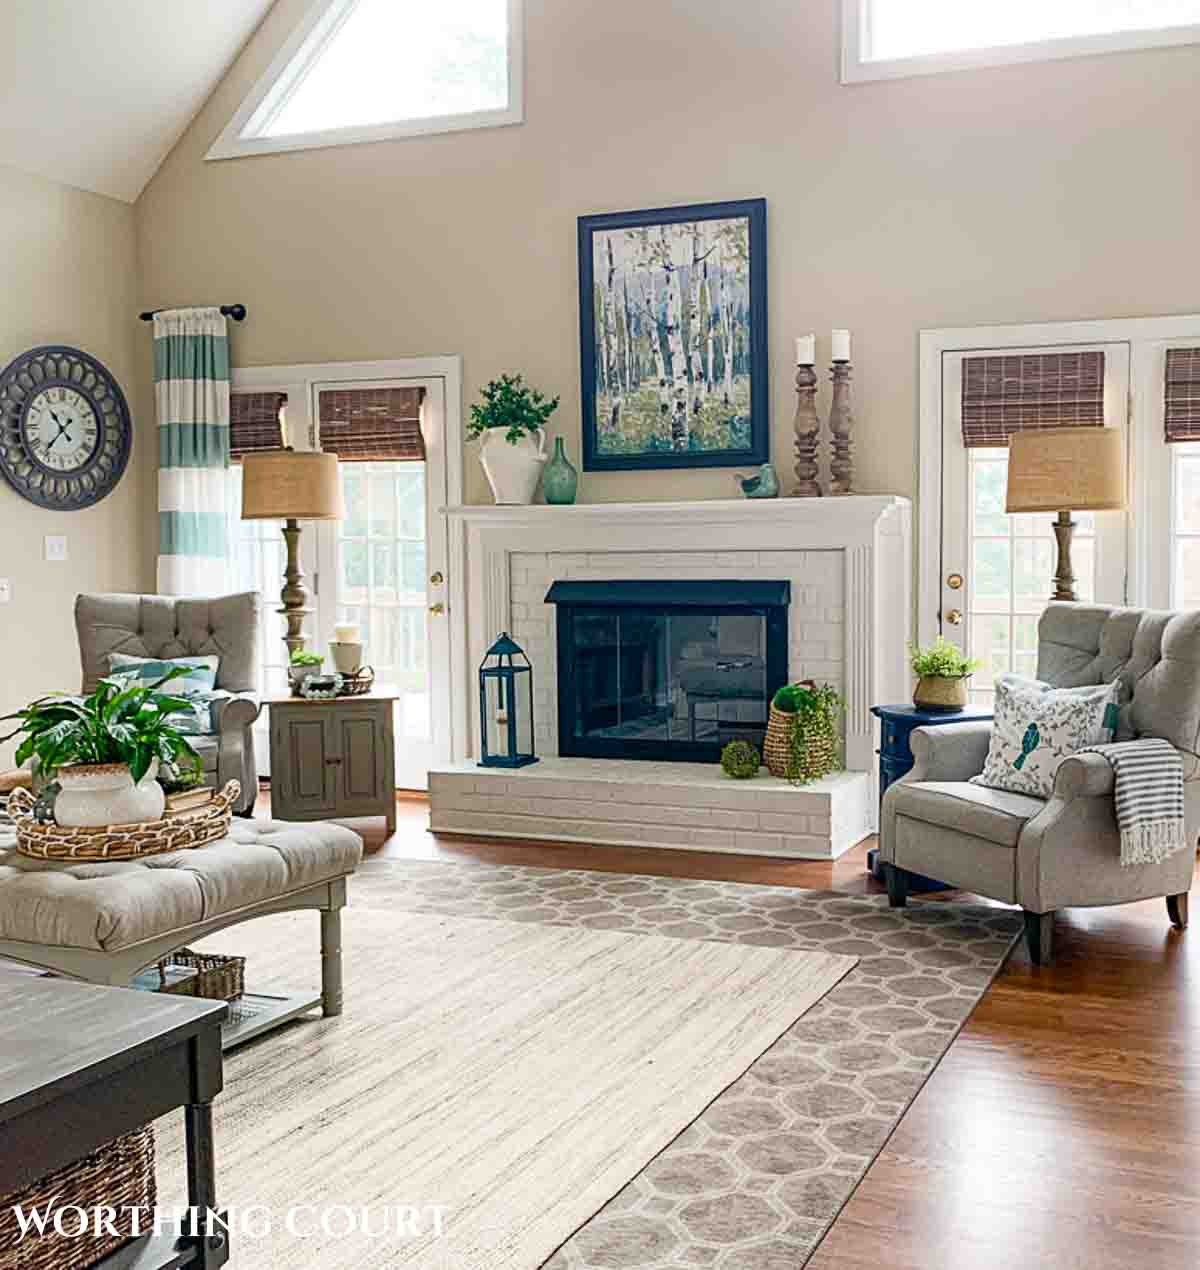 How to Pair a Rug with Your Couch, Rugs USA